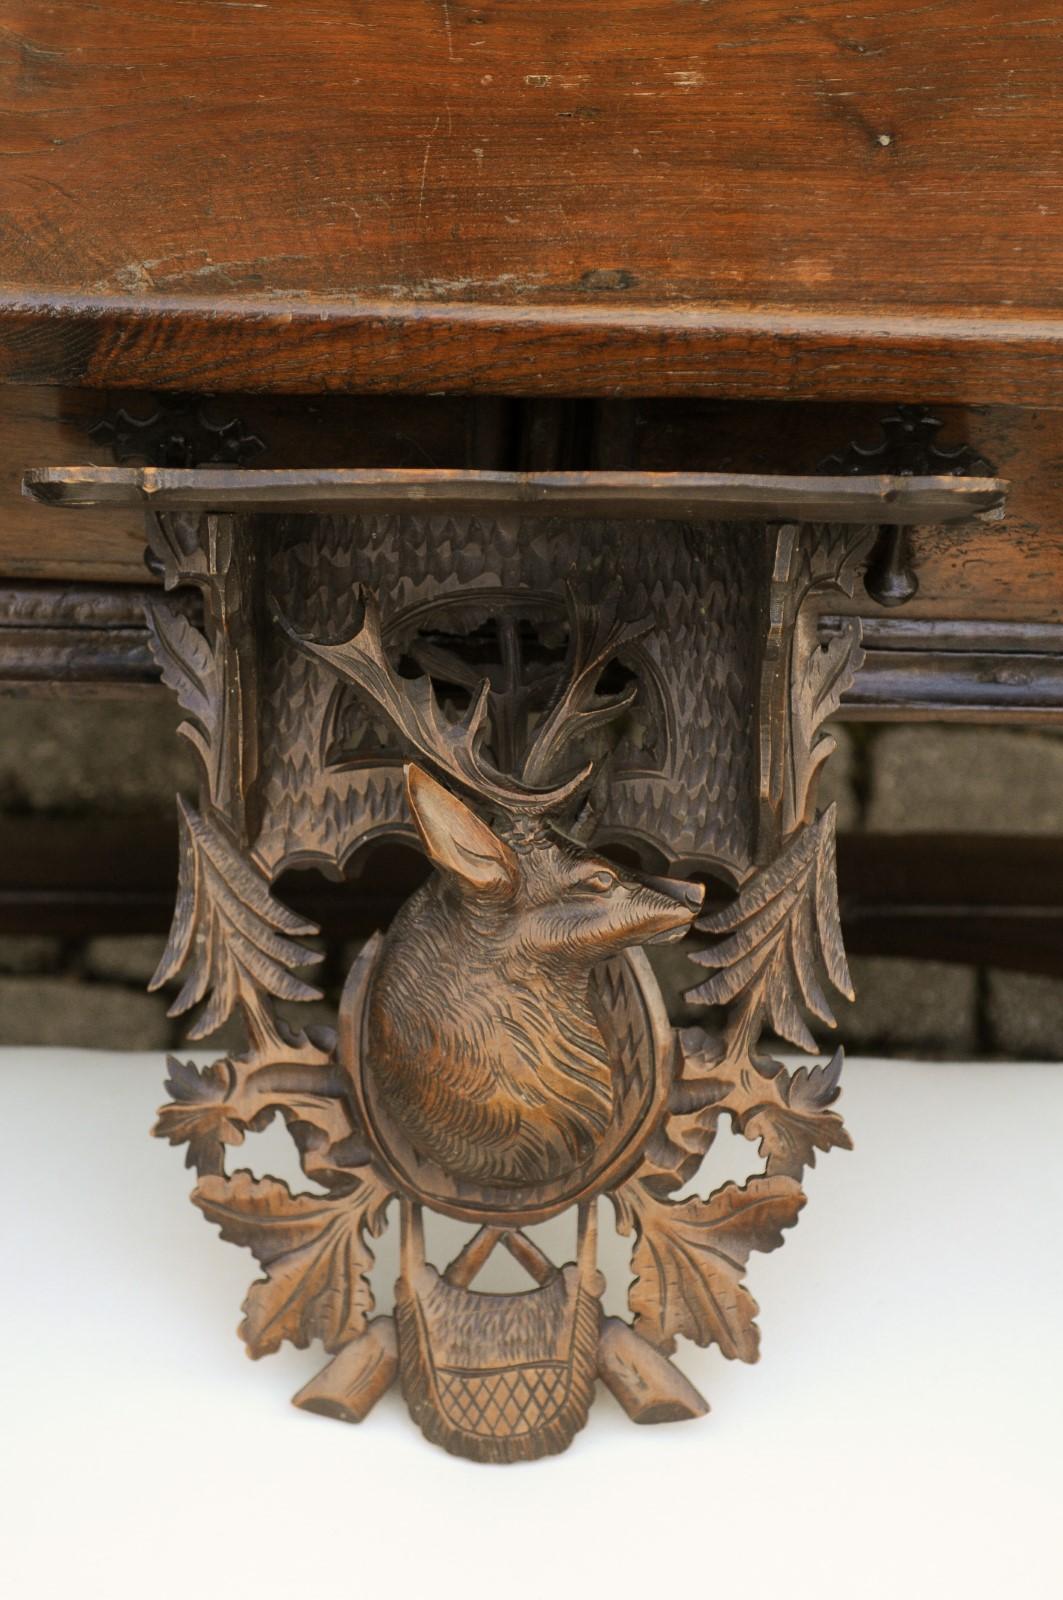 A Swiss Black Forest period oak wall bracket from the early 20th century, with hand carved stag motif. This early 20th-century Swiss Black Forest oak wall bracket, hailing from the scenic landscapes of Switzerland in the 1920s, captivates with its